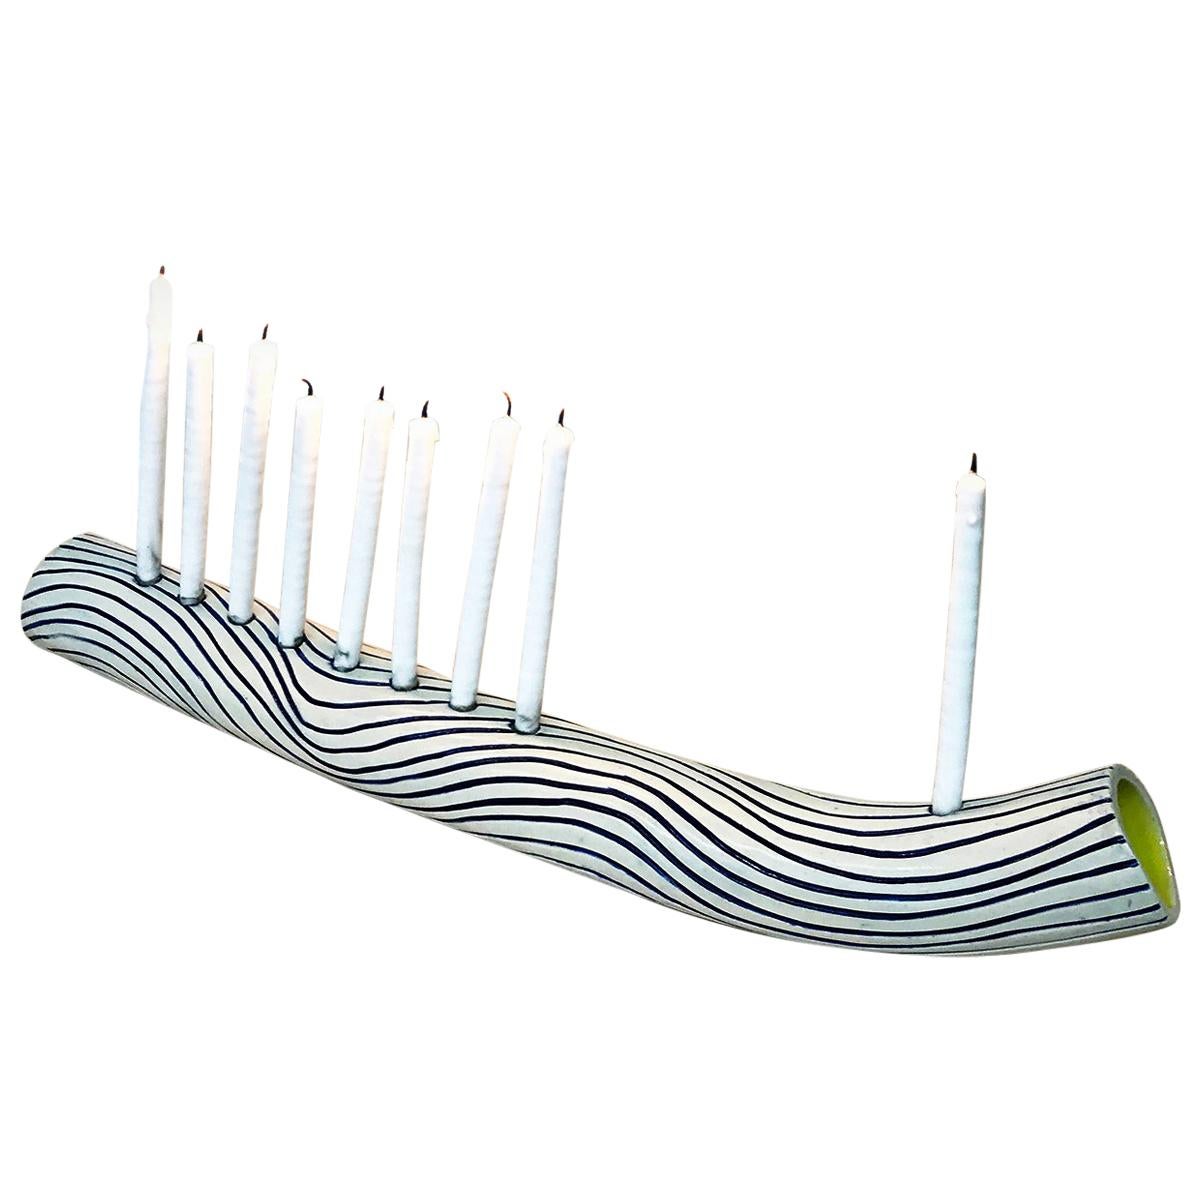 Blue Wave Hand-Built Ceramic Menorah by Re/Press Editions - Large For Sale